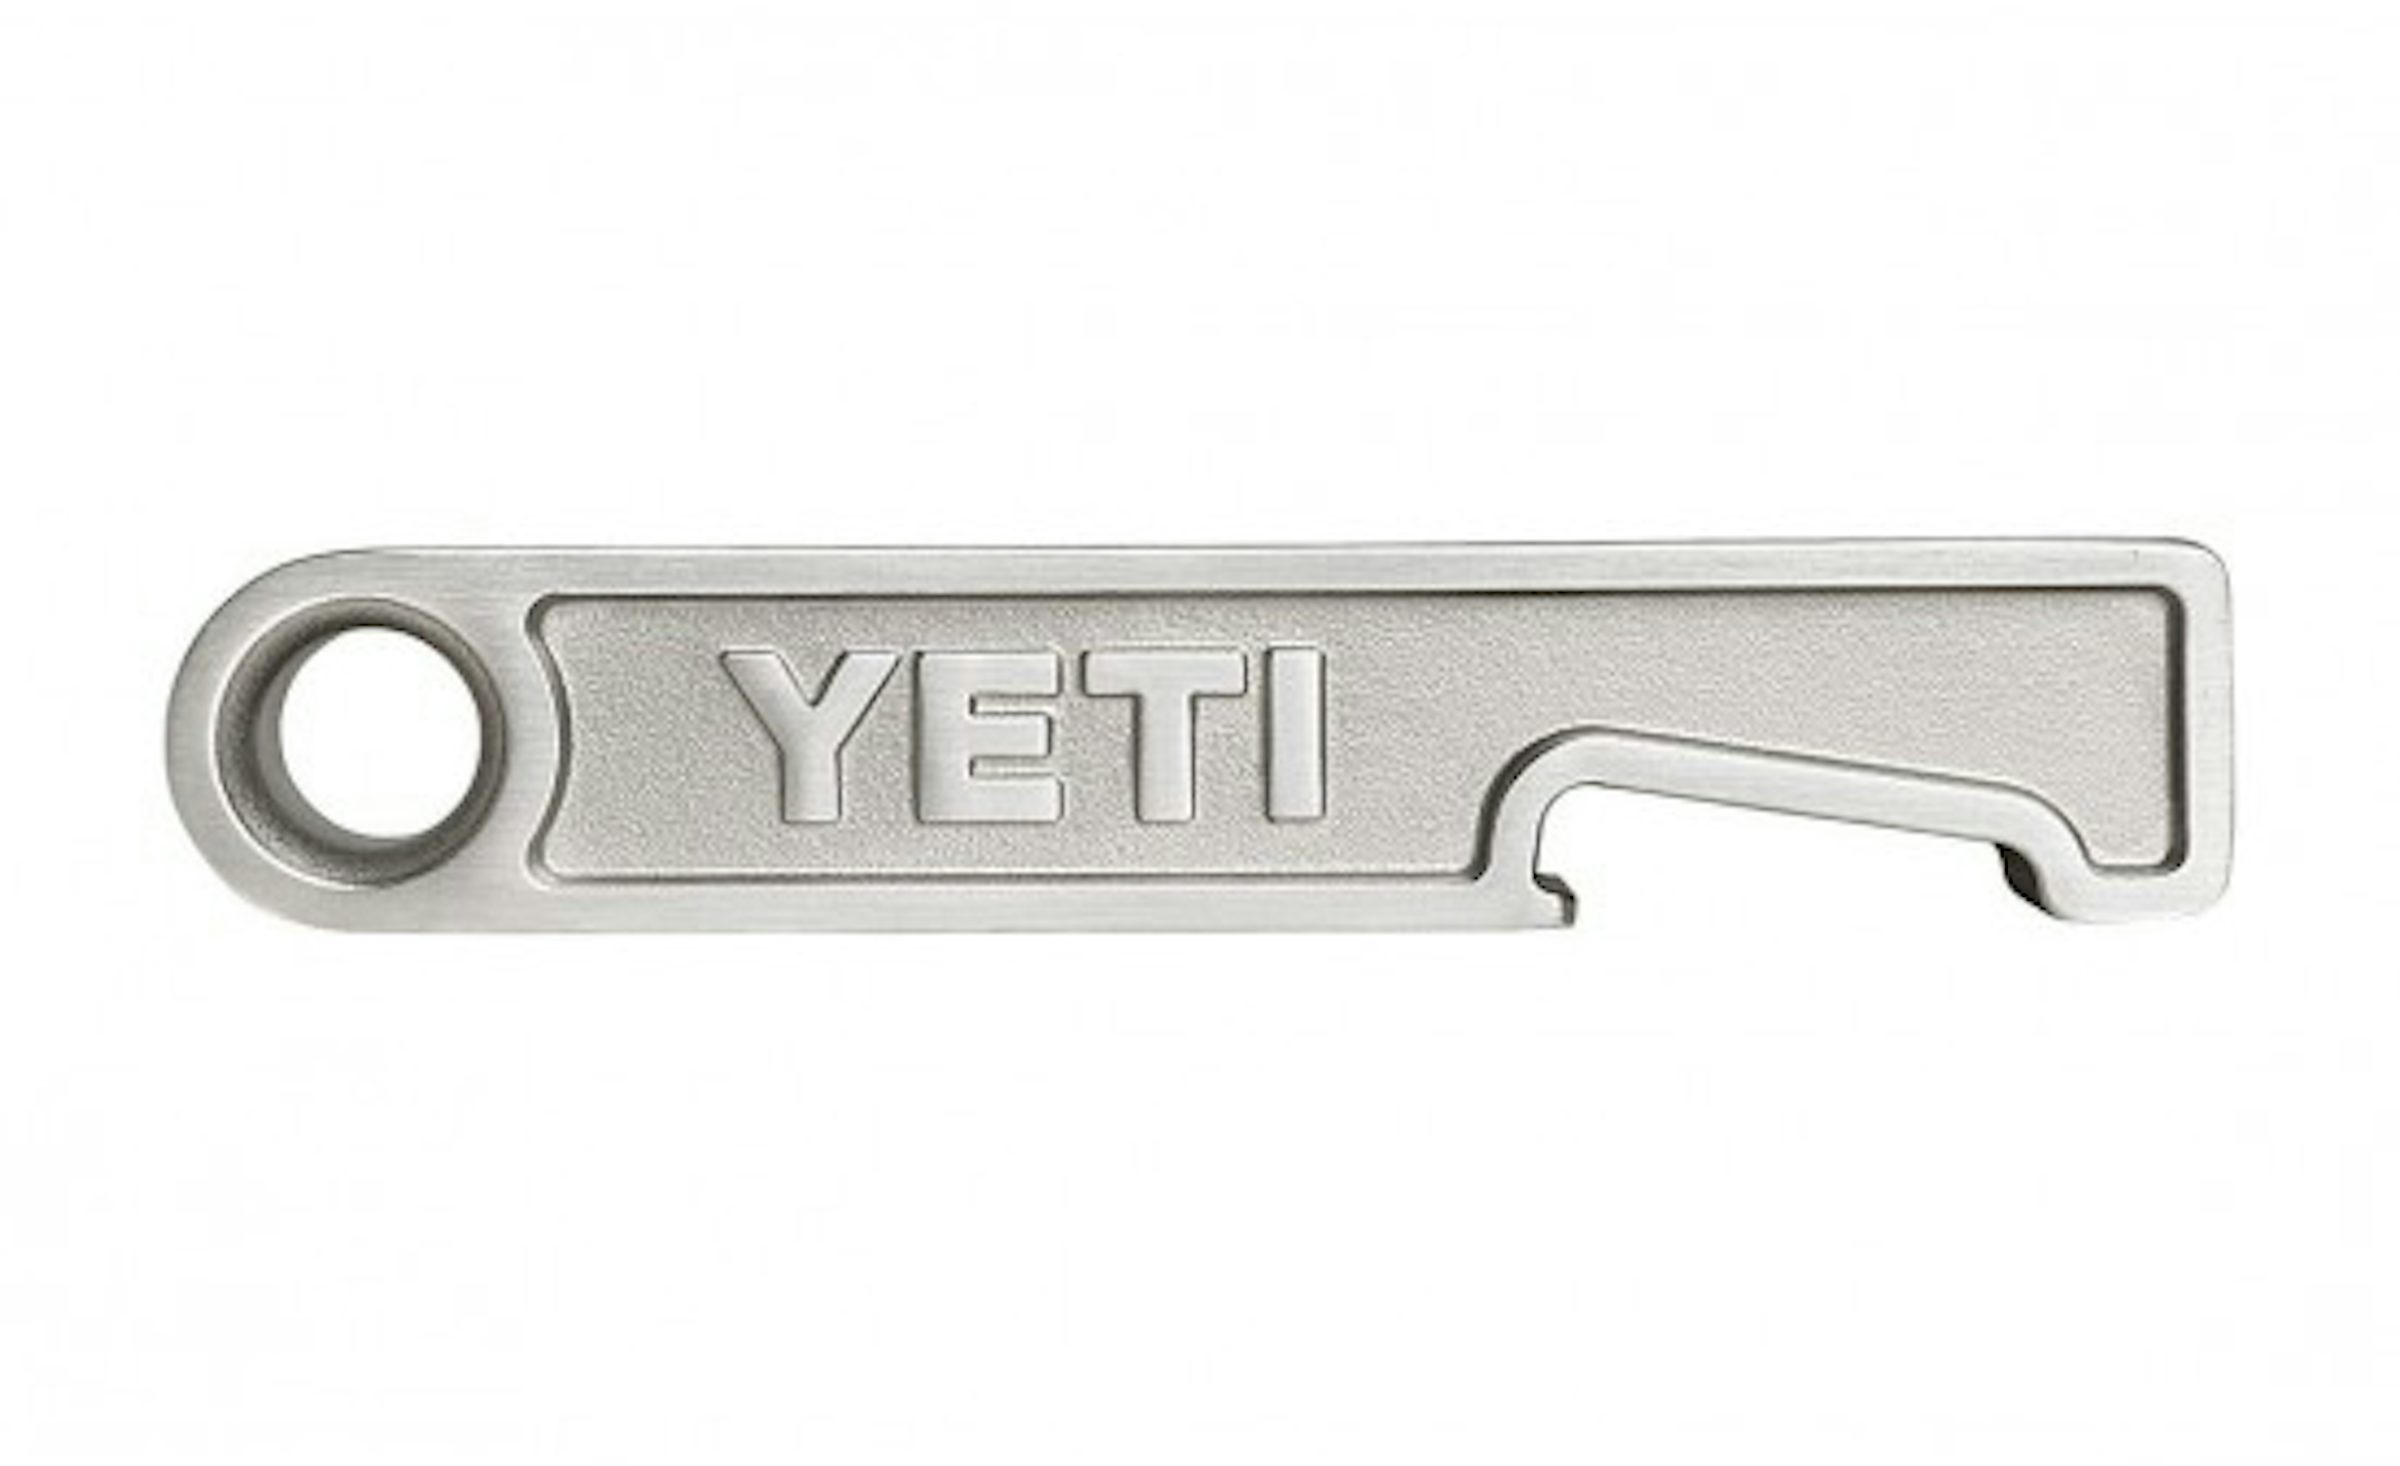 Yeti Cooler Brick Bottle Opener V2 Limited Edition Brand New In Box NIB  Limited